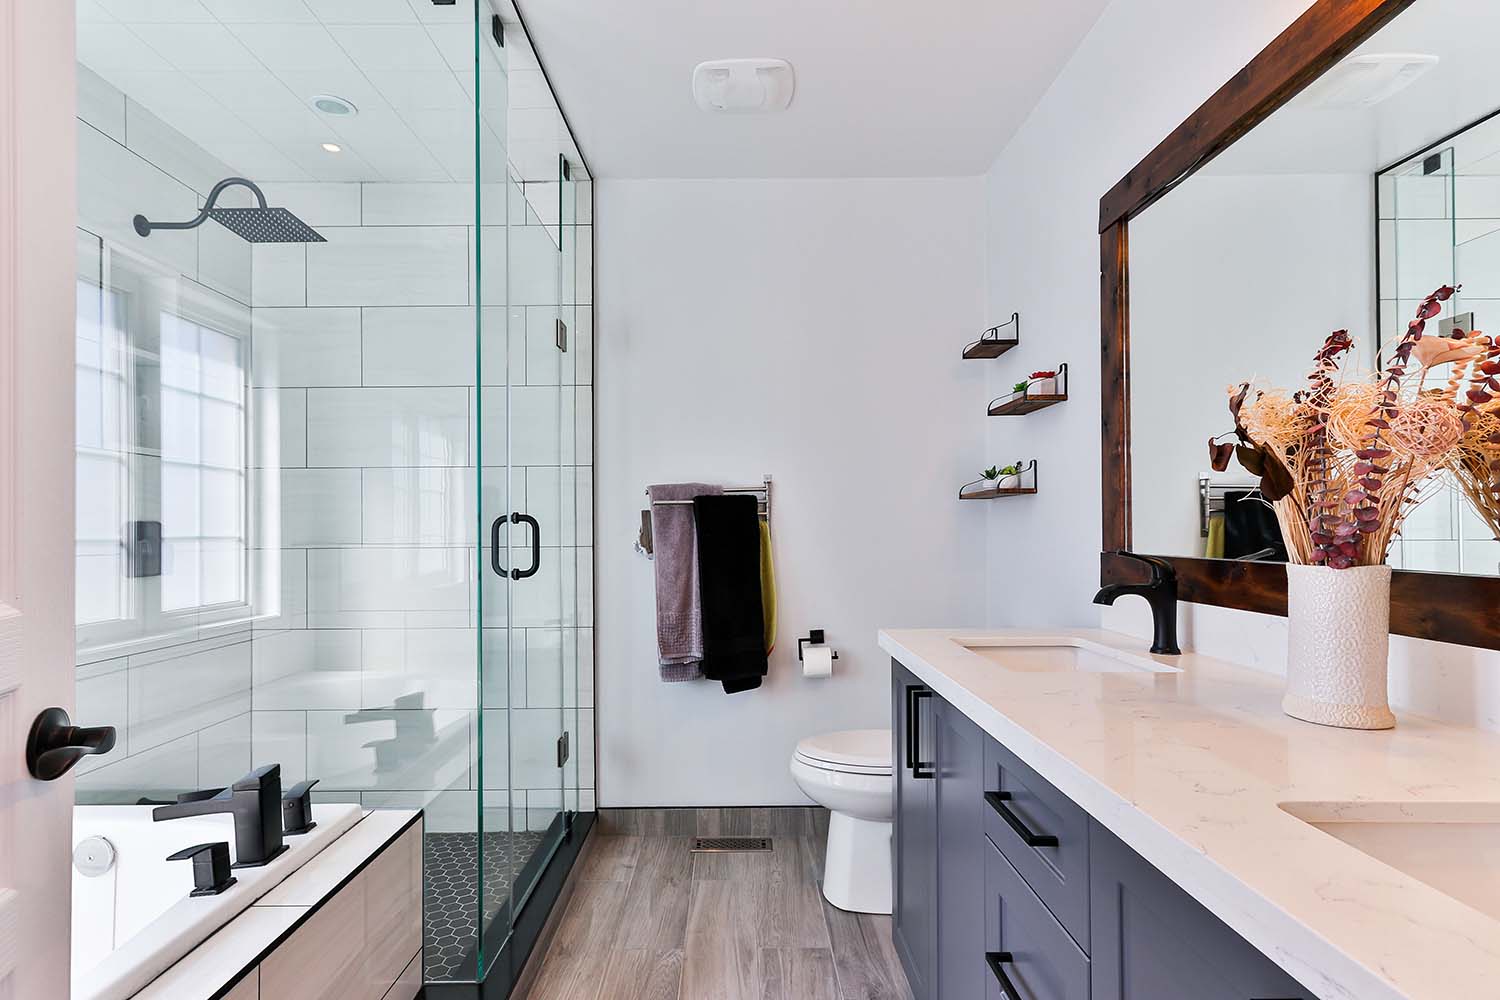 How To Make a Small Bathroom Look Bigger